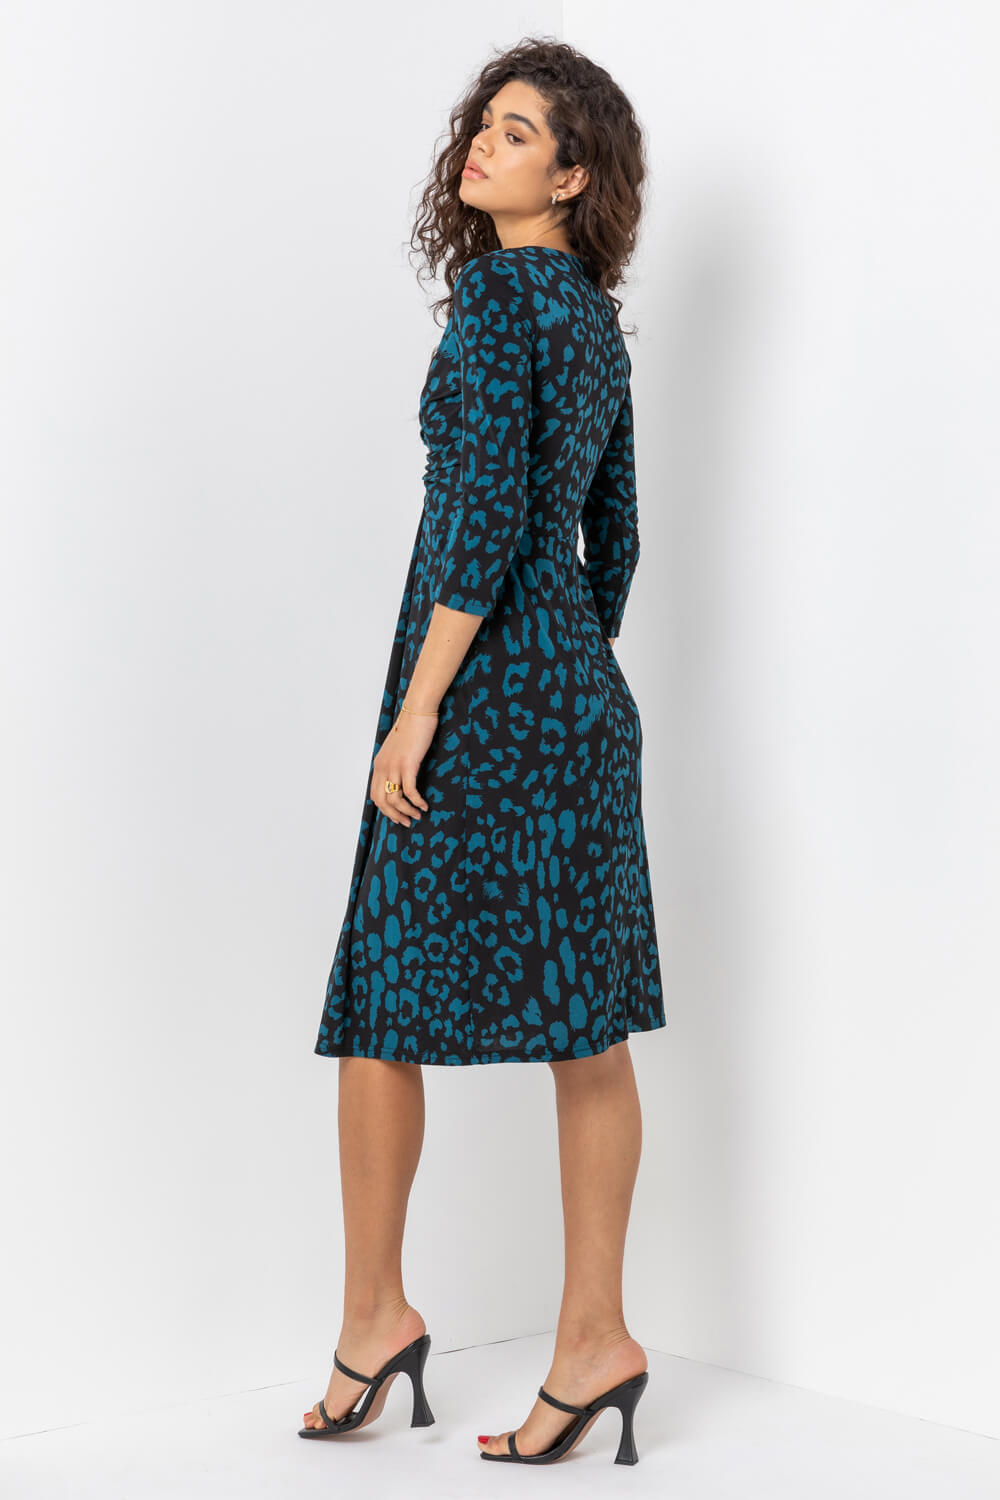 Teal Animal Print Fit And Flare Dress, Image 2 of 4